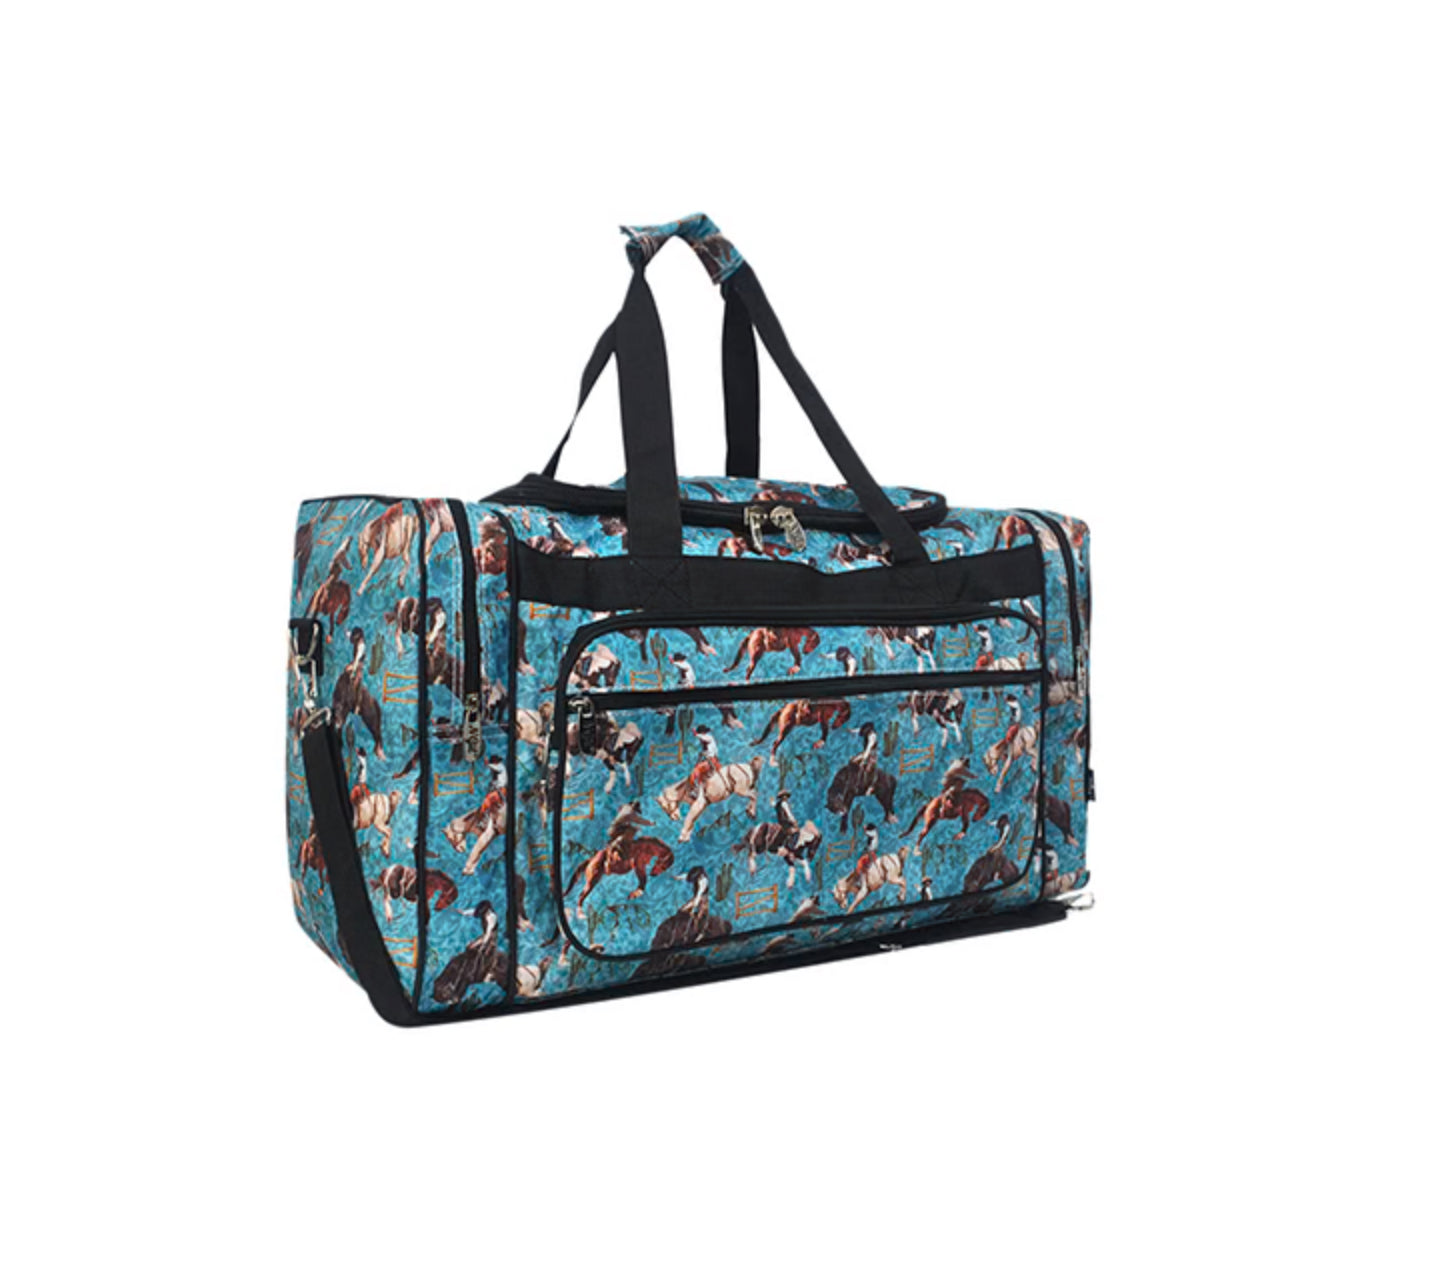 Giddy Up Canvas 23” Duffle Bag